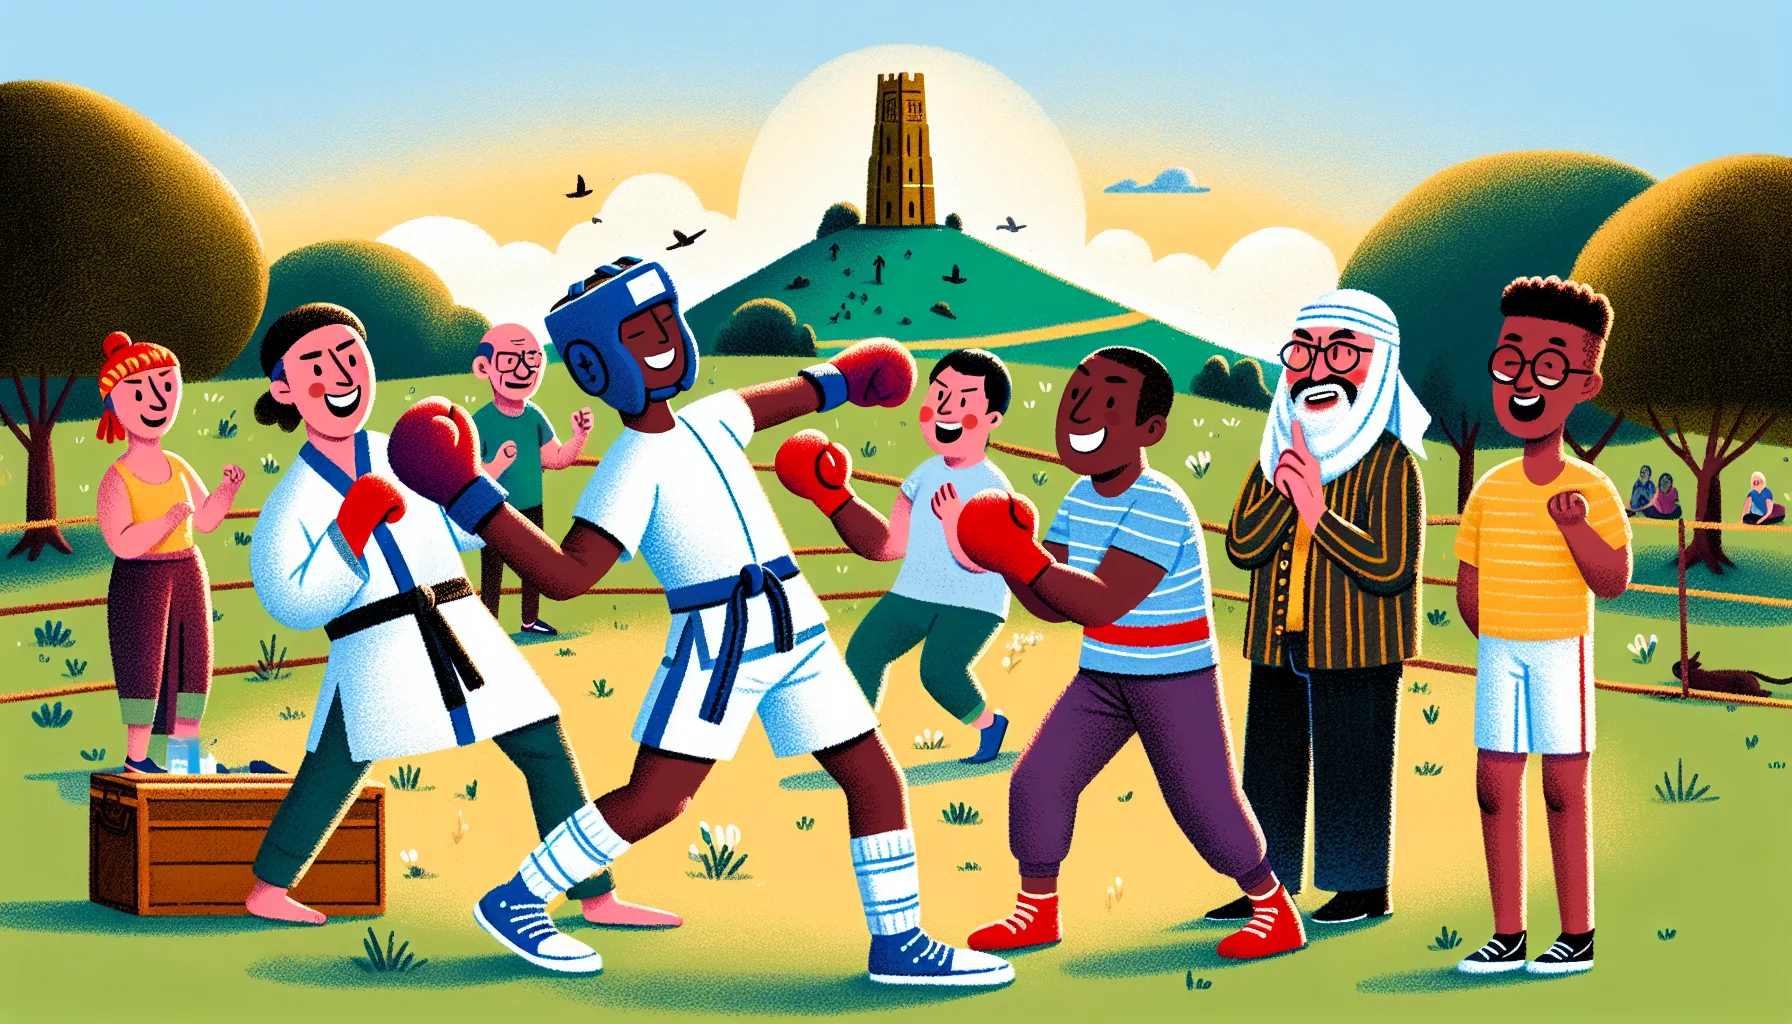 Draw a humorous and captivating scene of kickboxing at Glastonbury. Visualize an outdoor grassy setting with the iconic Glastonbury Tor in the background. In the foreground, depict a diverse scene of people engaging in kickboxing. Add a touch of humor by showing a black female participant's punch accidentally knocking off a Middle-Eastern male opponent's protective headgear, but both characters laughing it off in good spirits. Nearby, an Hispanic referee is trying hard to hold back their laughter while holding a stop sign, signaling a pause in the match. The scene exudes warm vibes, suggesting that exercising can be a fun activity.